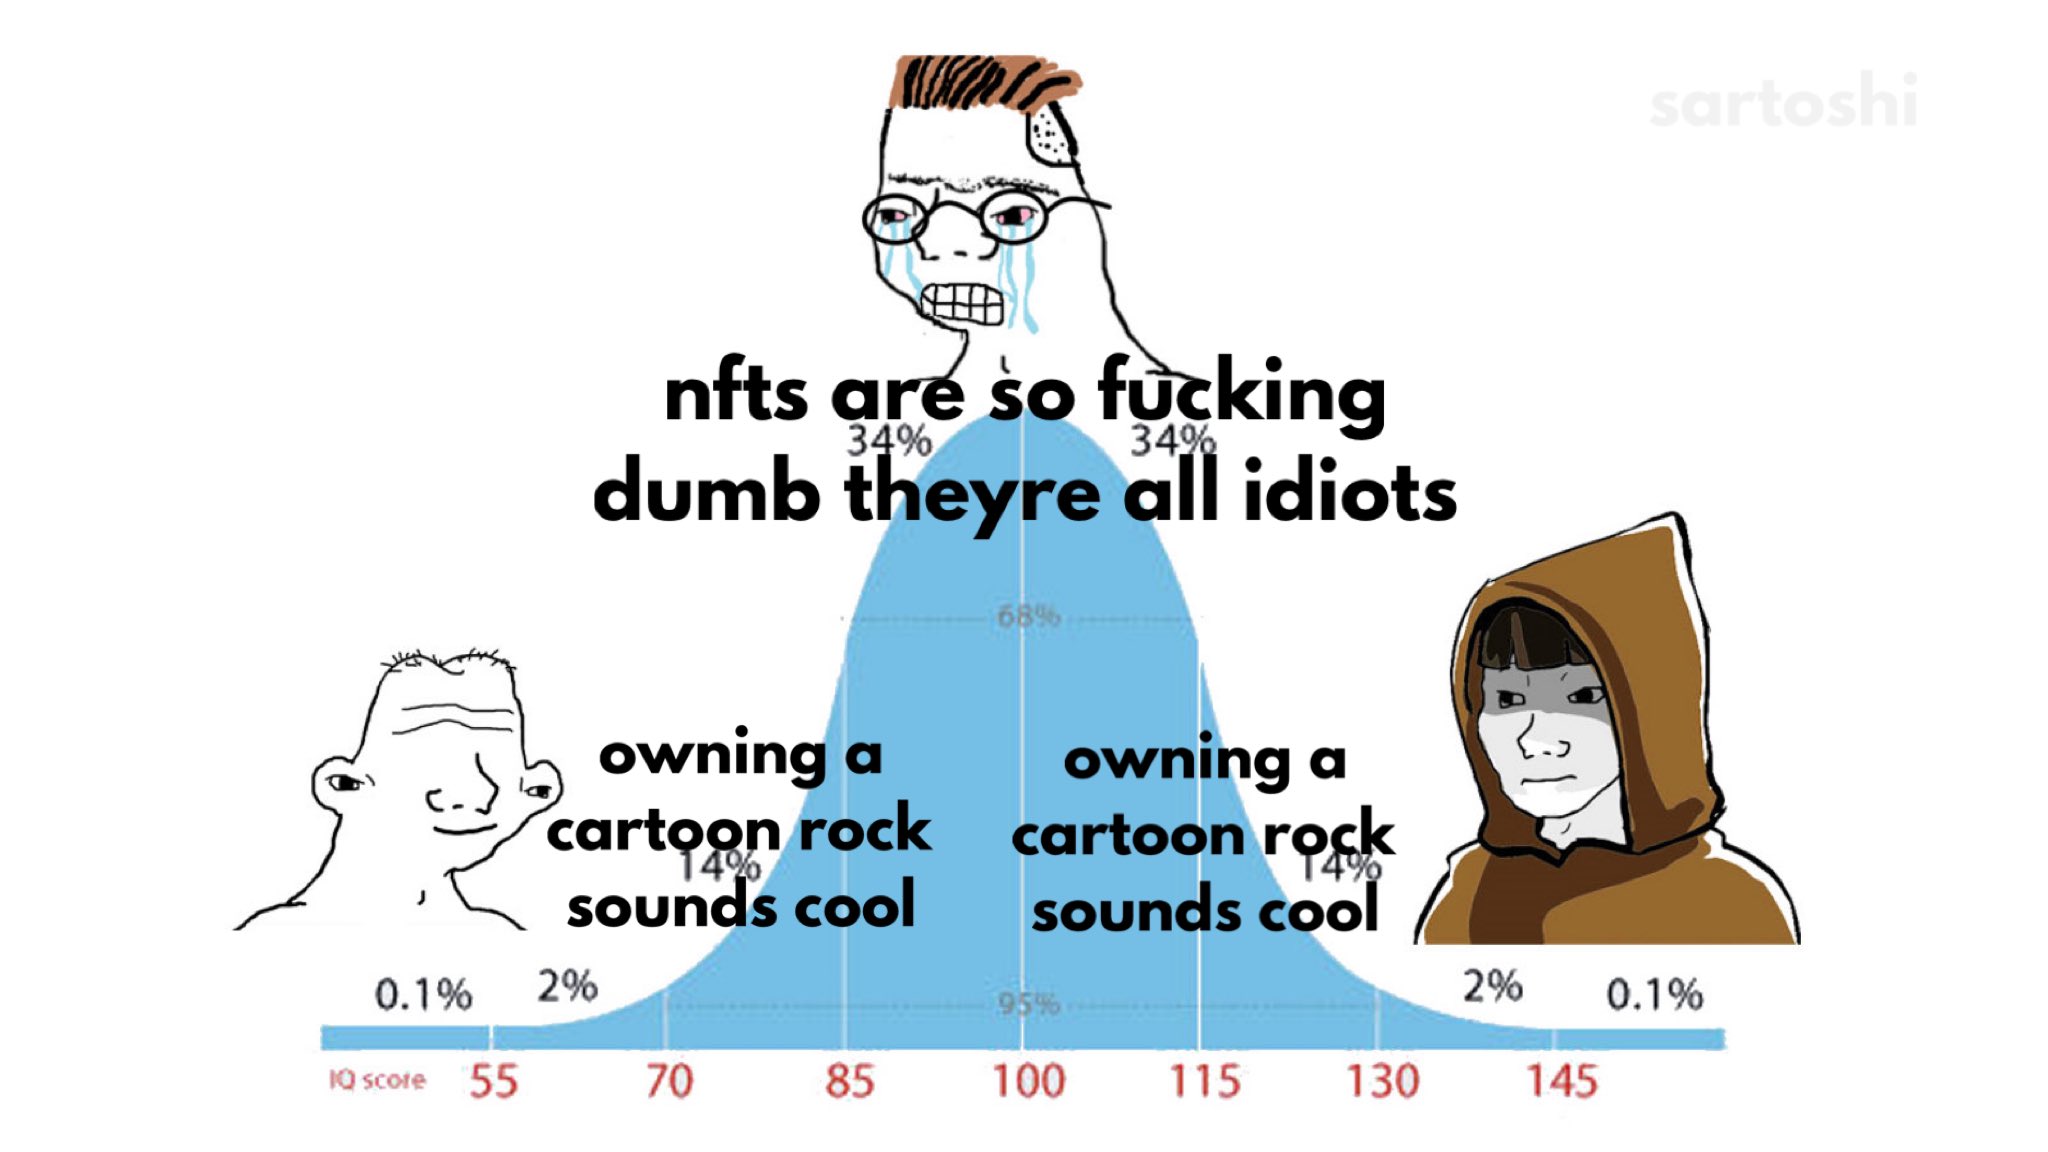 NFTs are so fucking dumb theyre all idiots meme